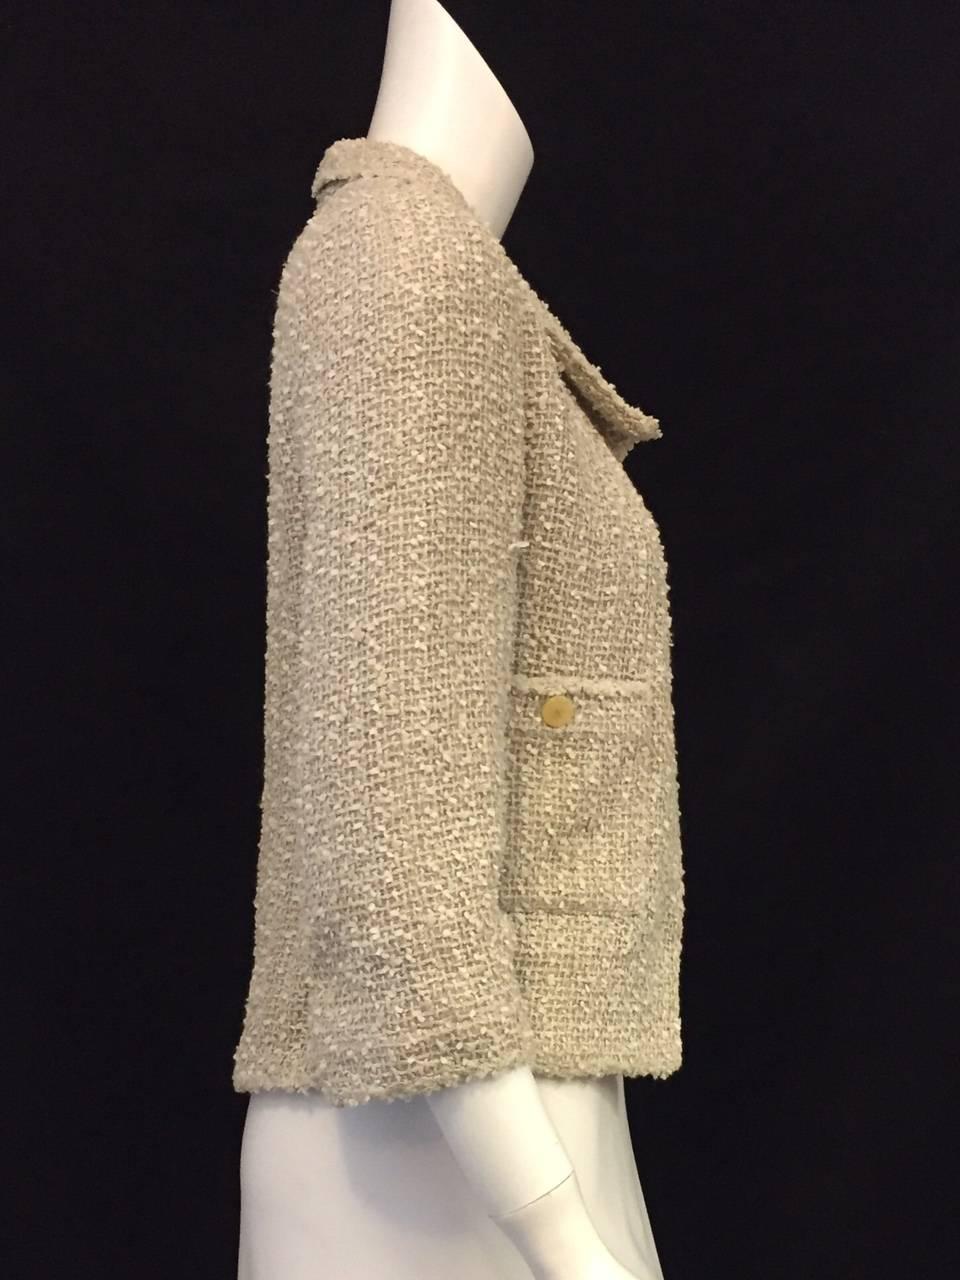 Chanel Beige Tweed Jacket is classic "Coco"!  Features the iconic tweed fabric that made Mademoiselle a household name, bracelet sleeves and two buttoned patch pockets.  No closure.  Ageless and timeless design works equally well with more